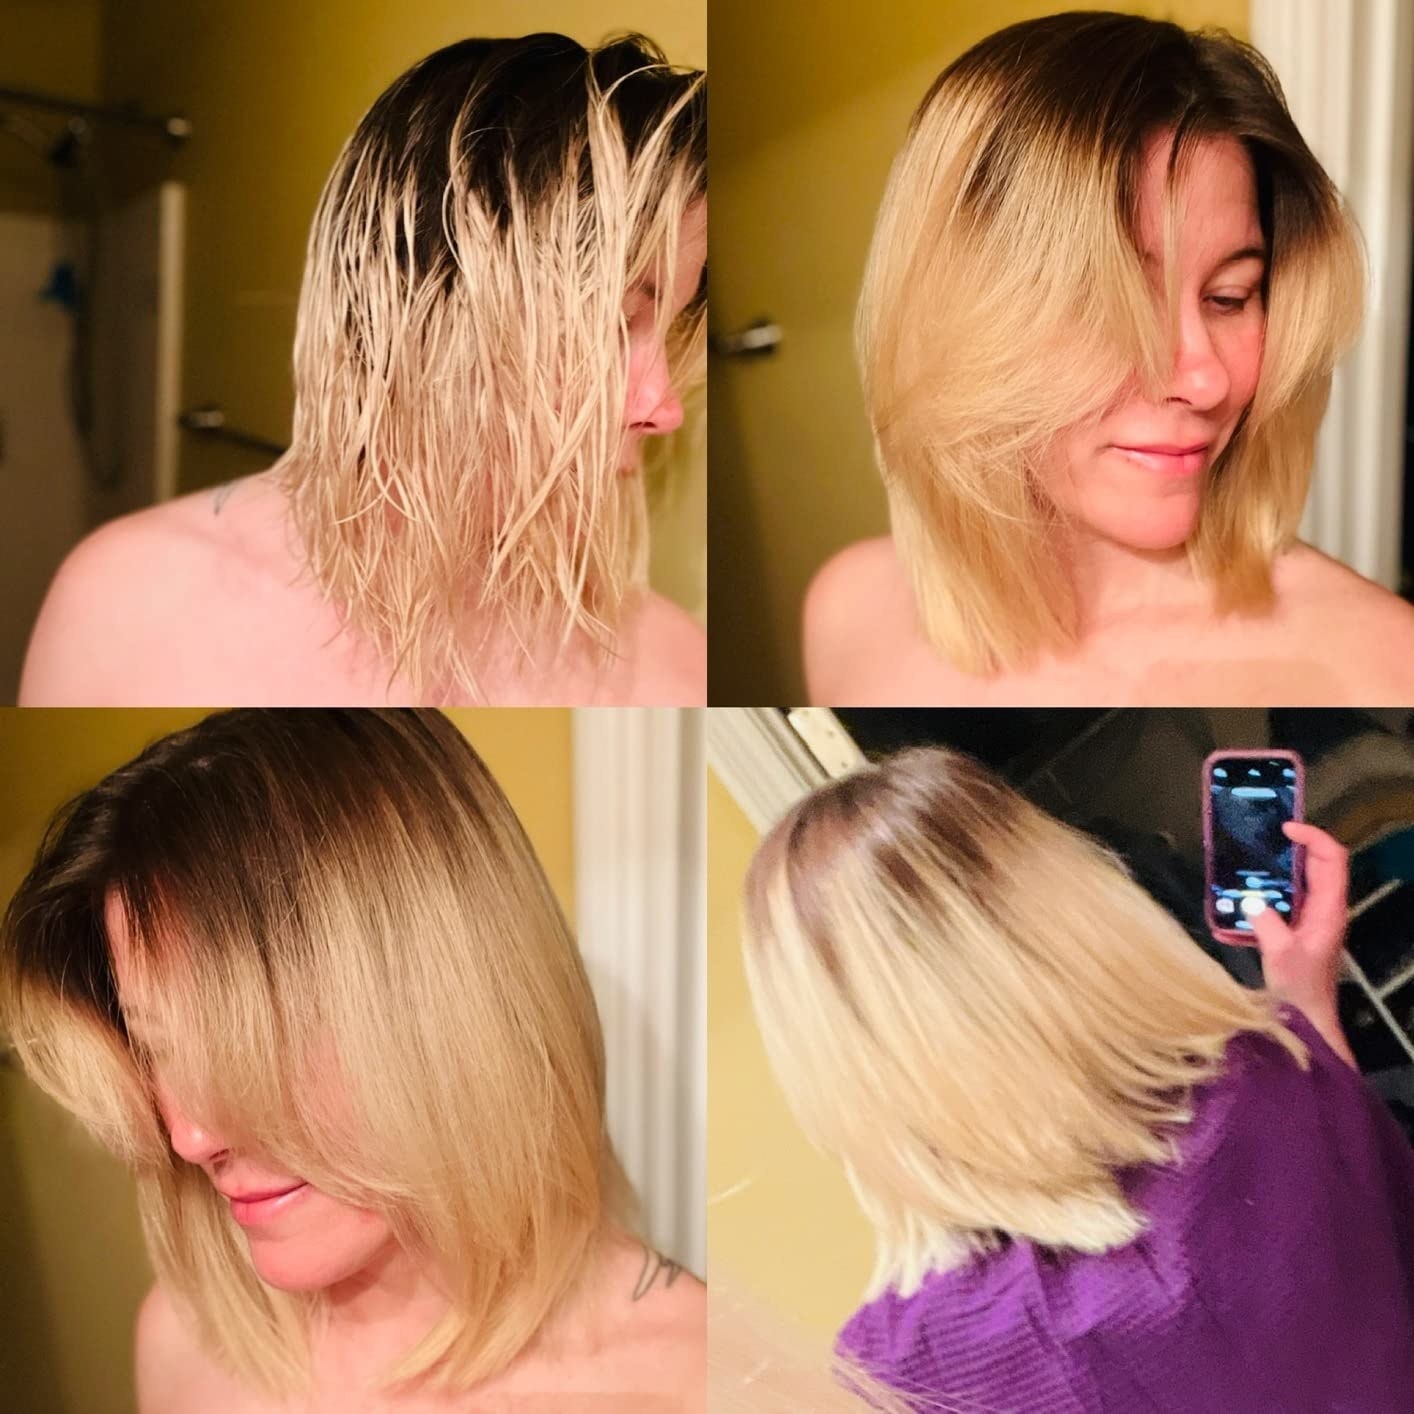 Reviewer photo collage showing wet wavy shoulderlength hair in top right with three different angles showing a salon-quality blowout after using the tool